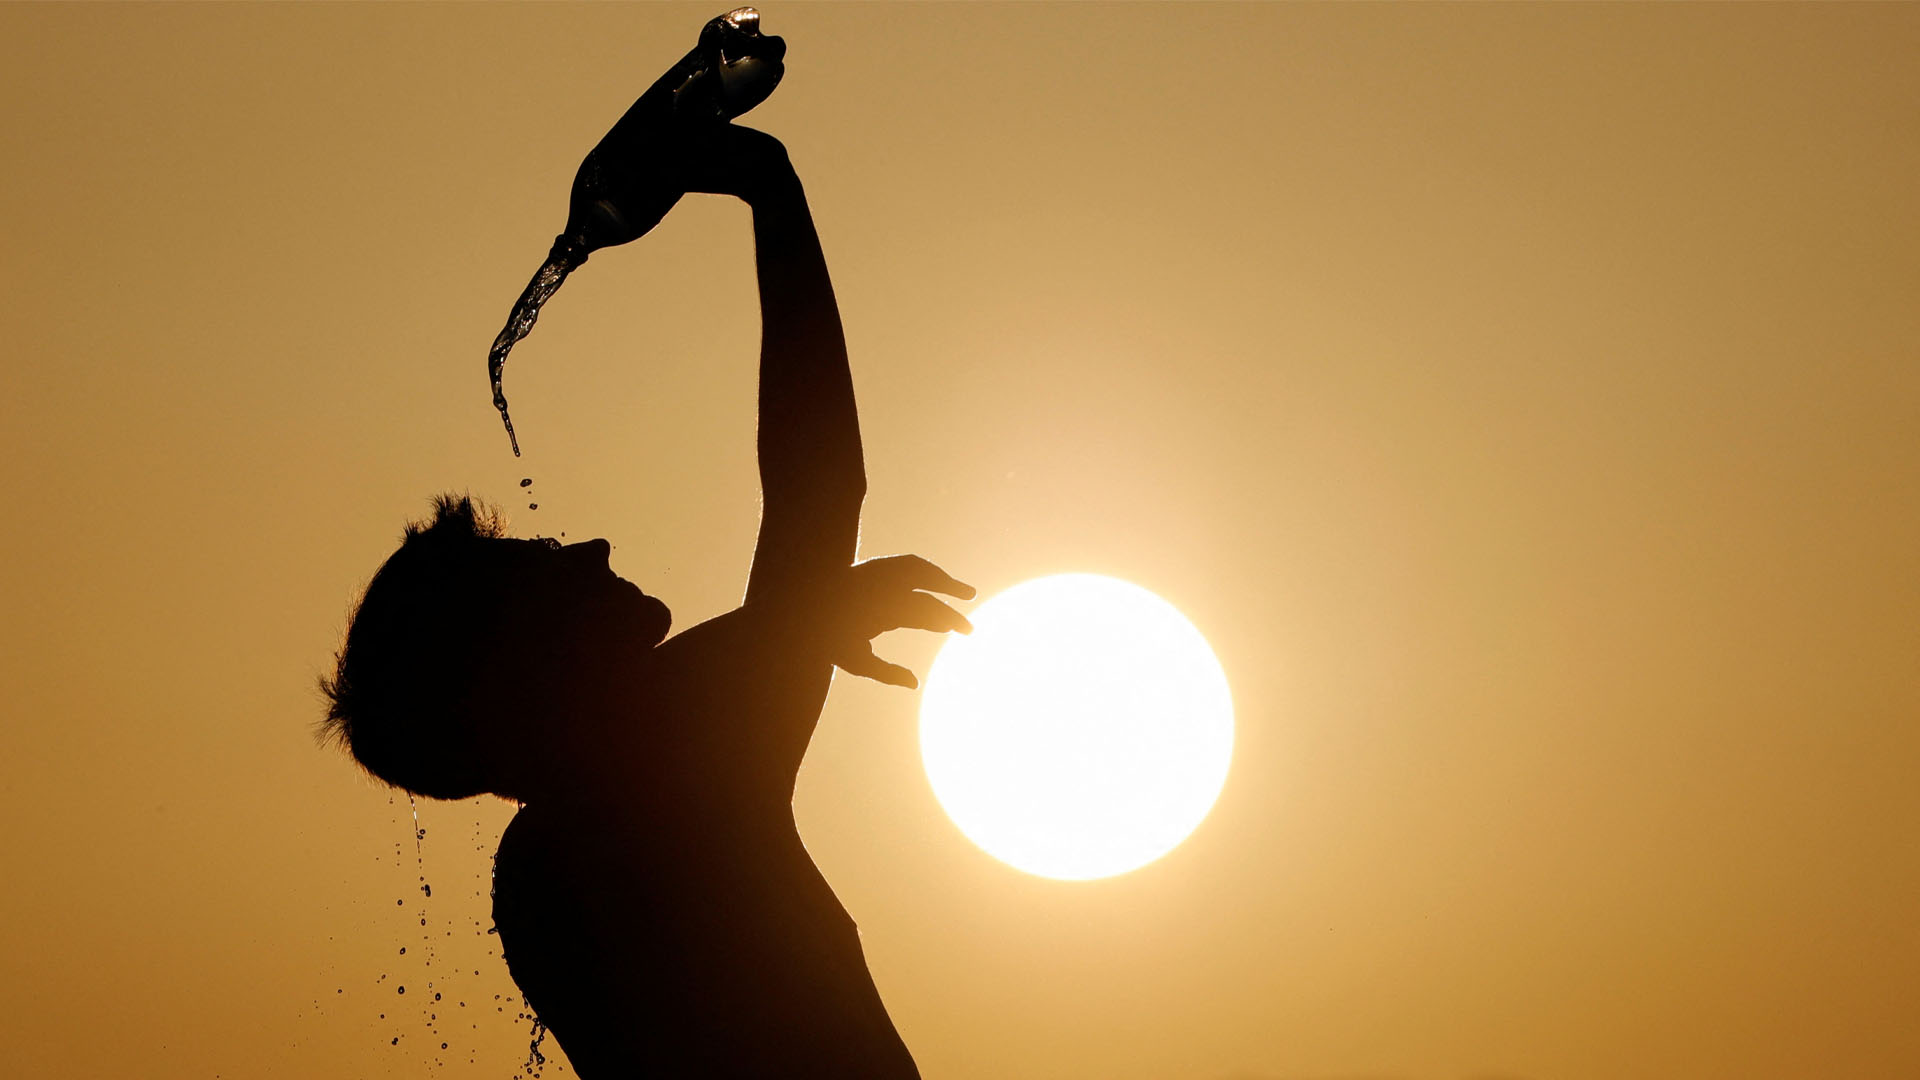 Heat wave conditions likely to continue over northwest India